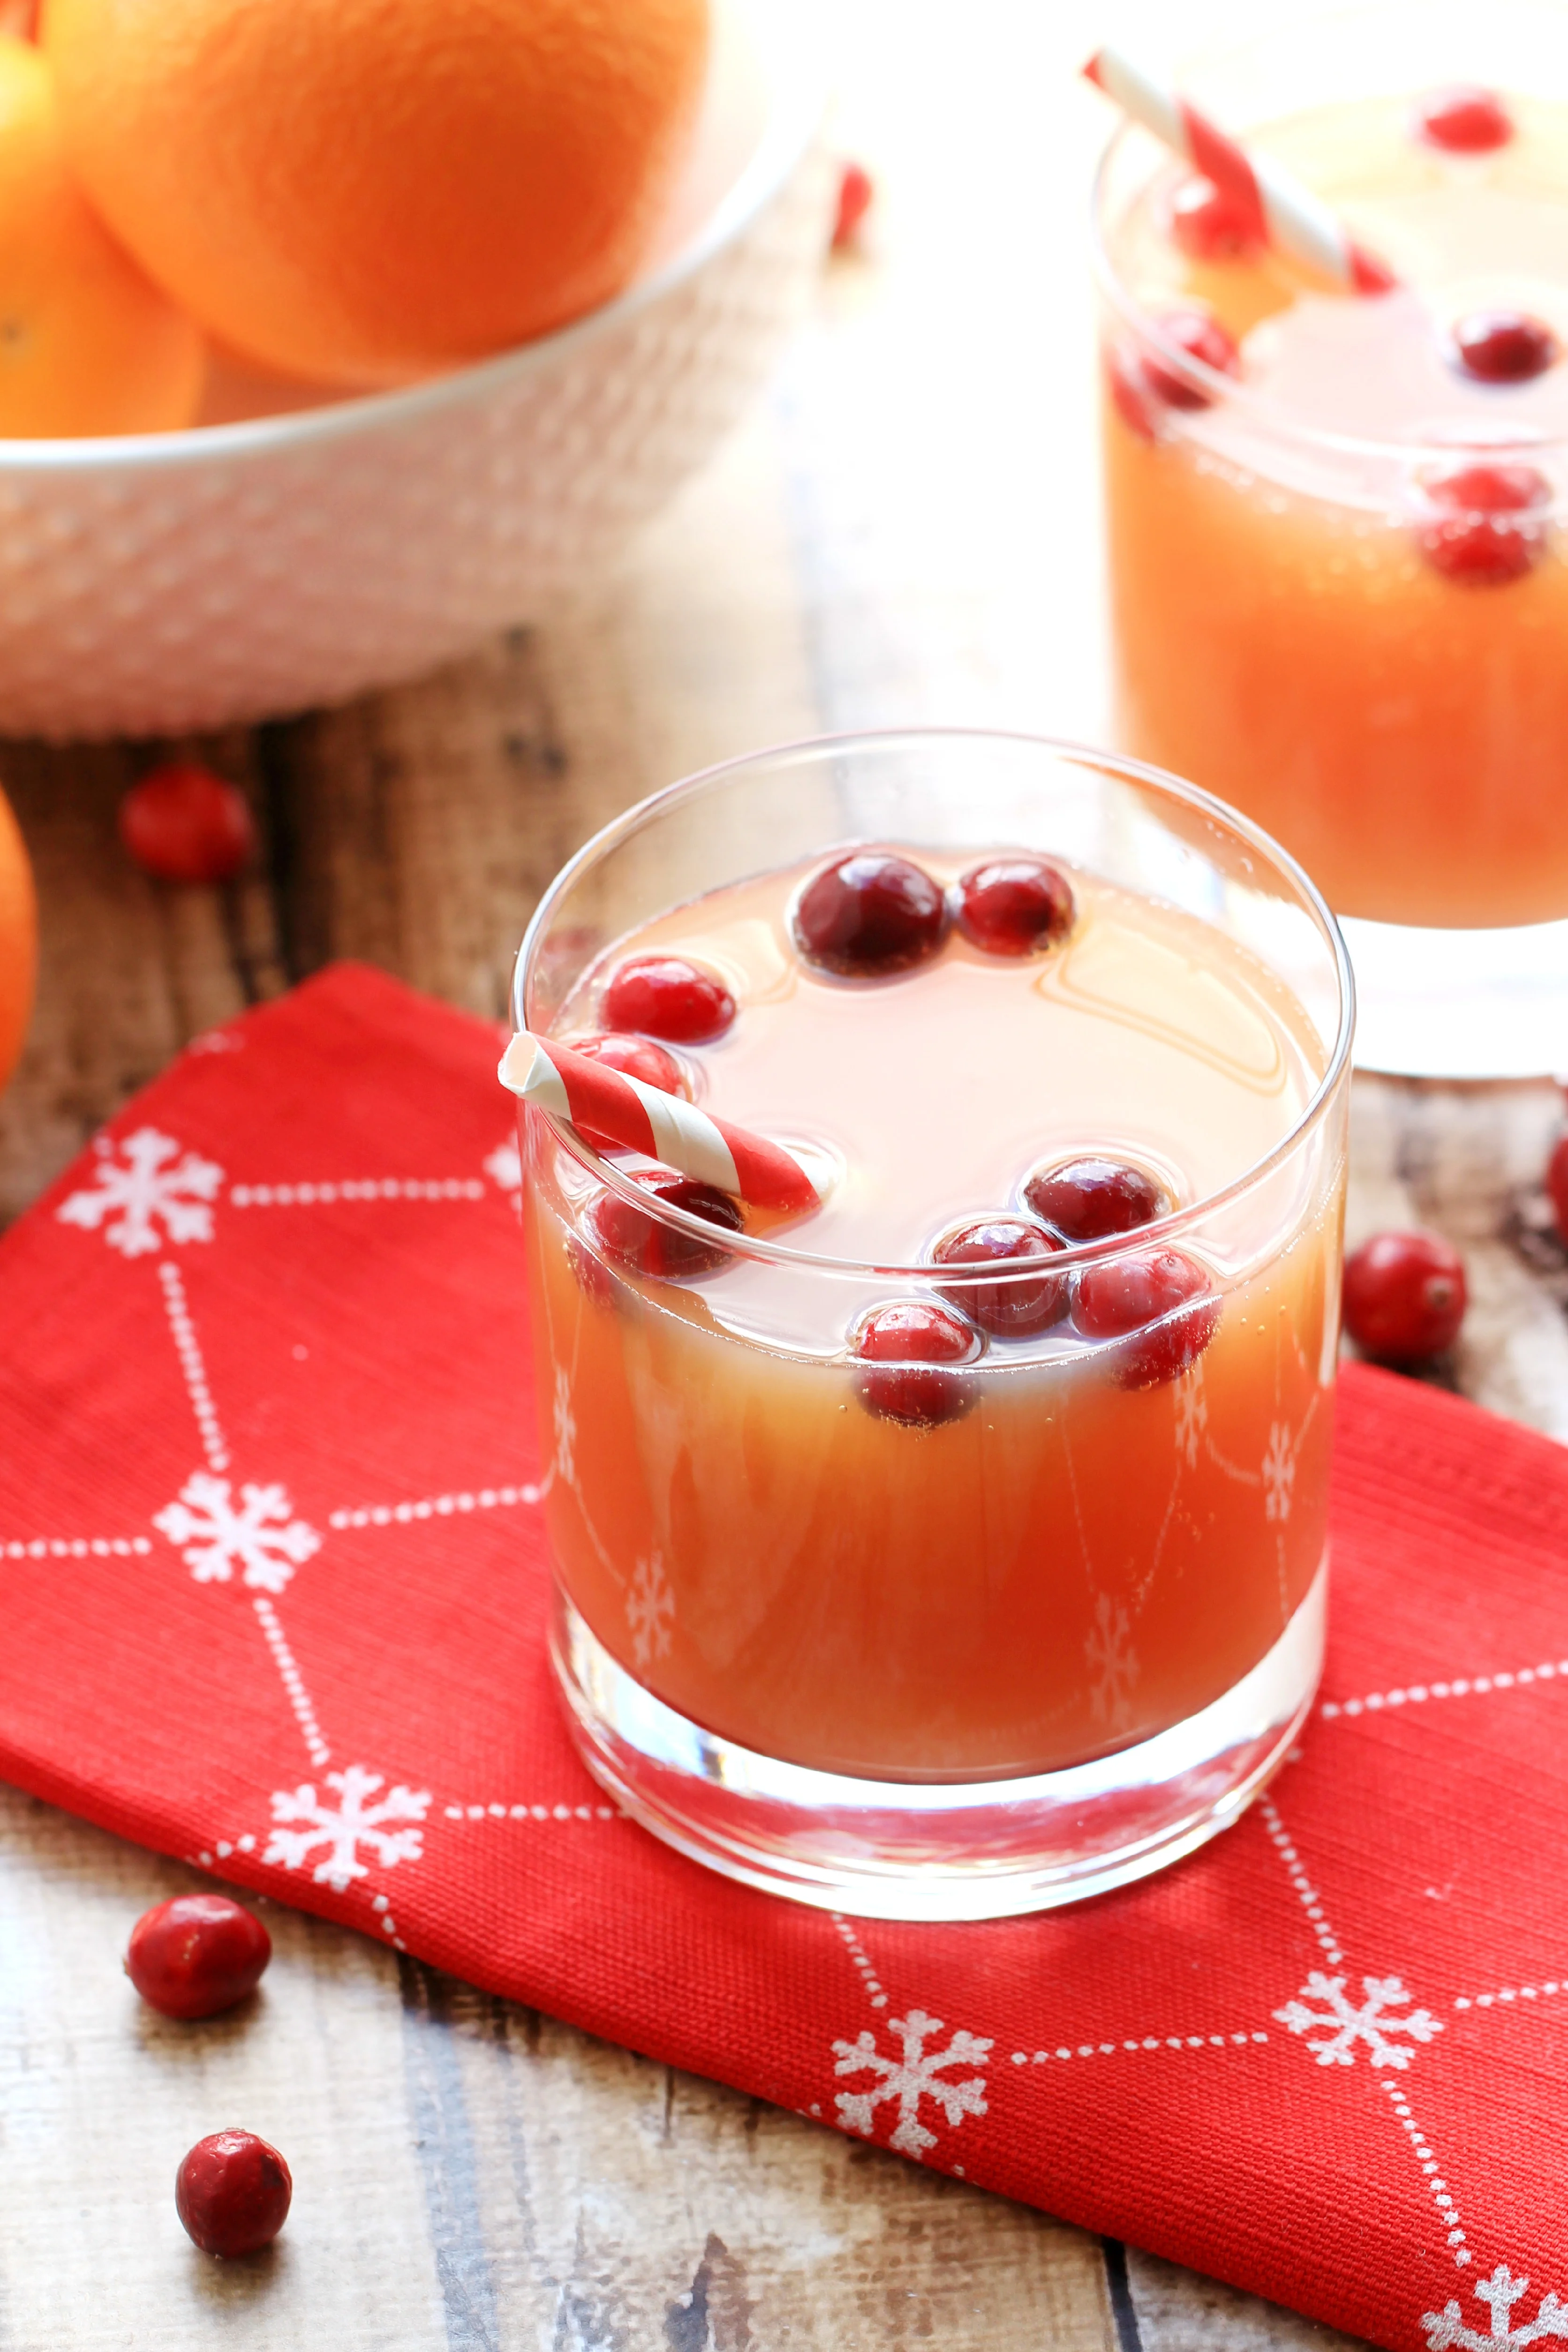 This Non-Alcoholic Cranberry Orange Spritzer is a festive drink for the holidays that everyone can enjoy.